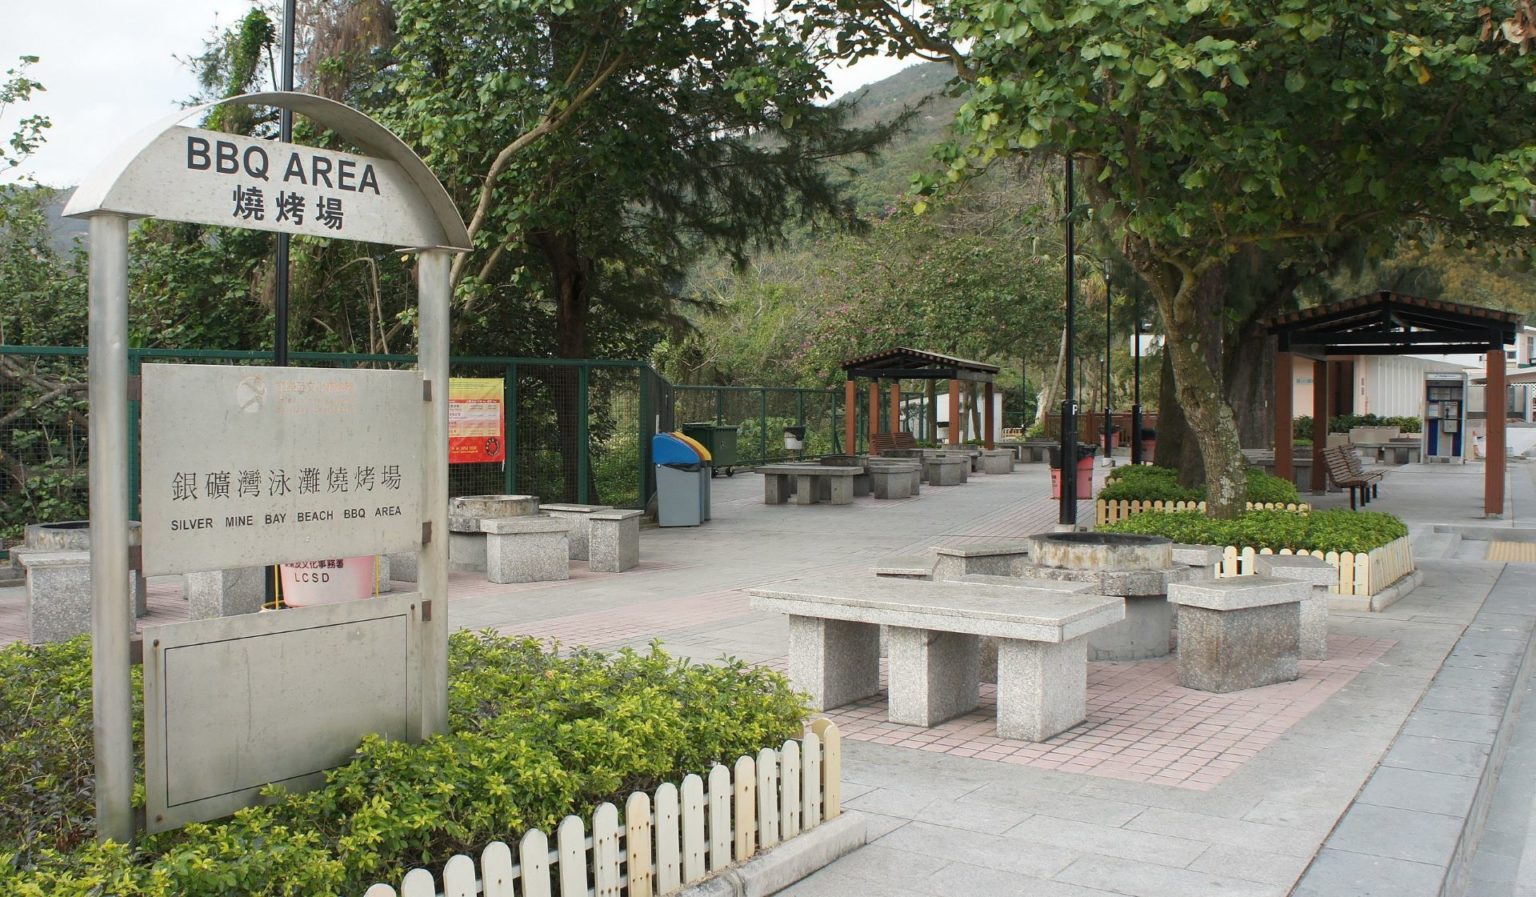 The Silvermine barbecue site in Mui Wo, Hong Kong